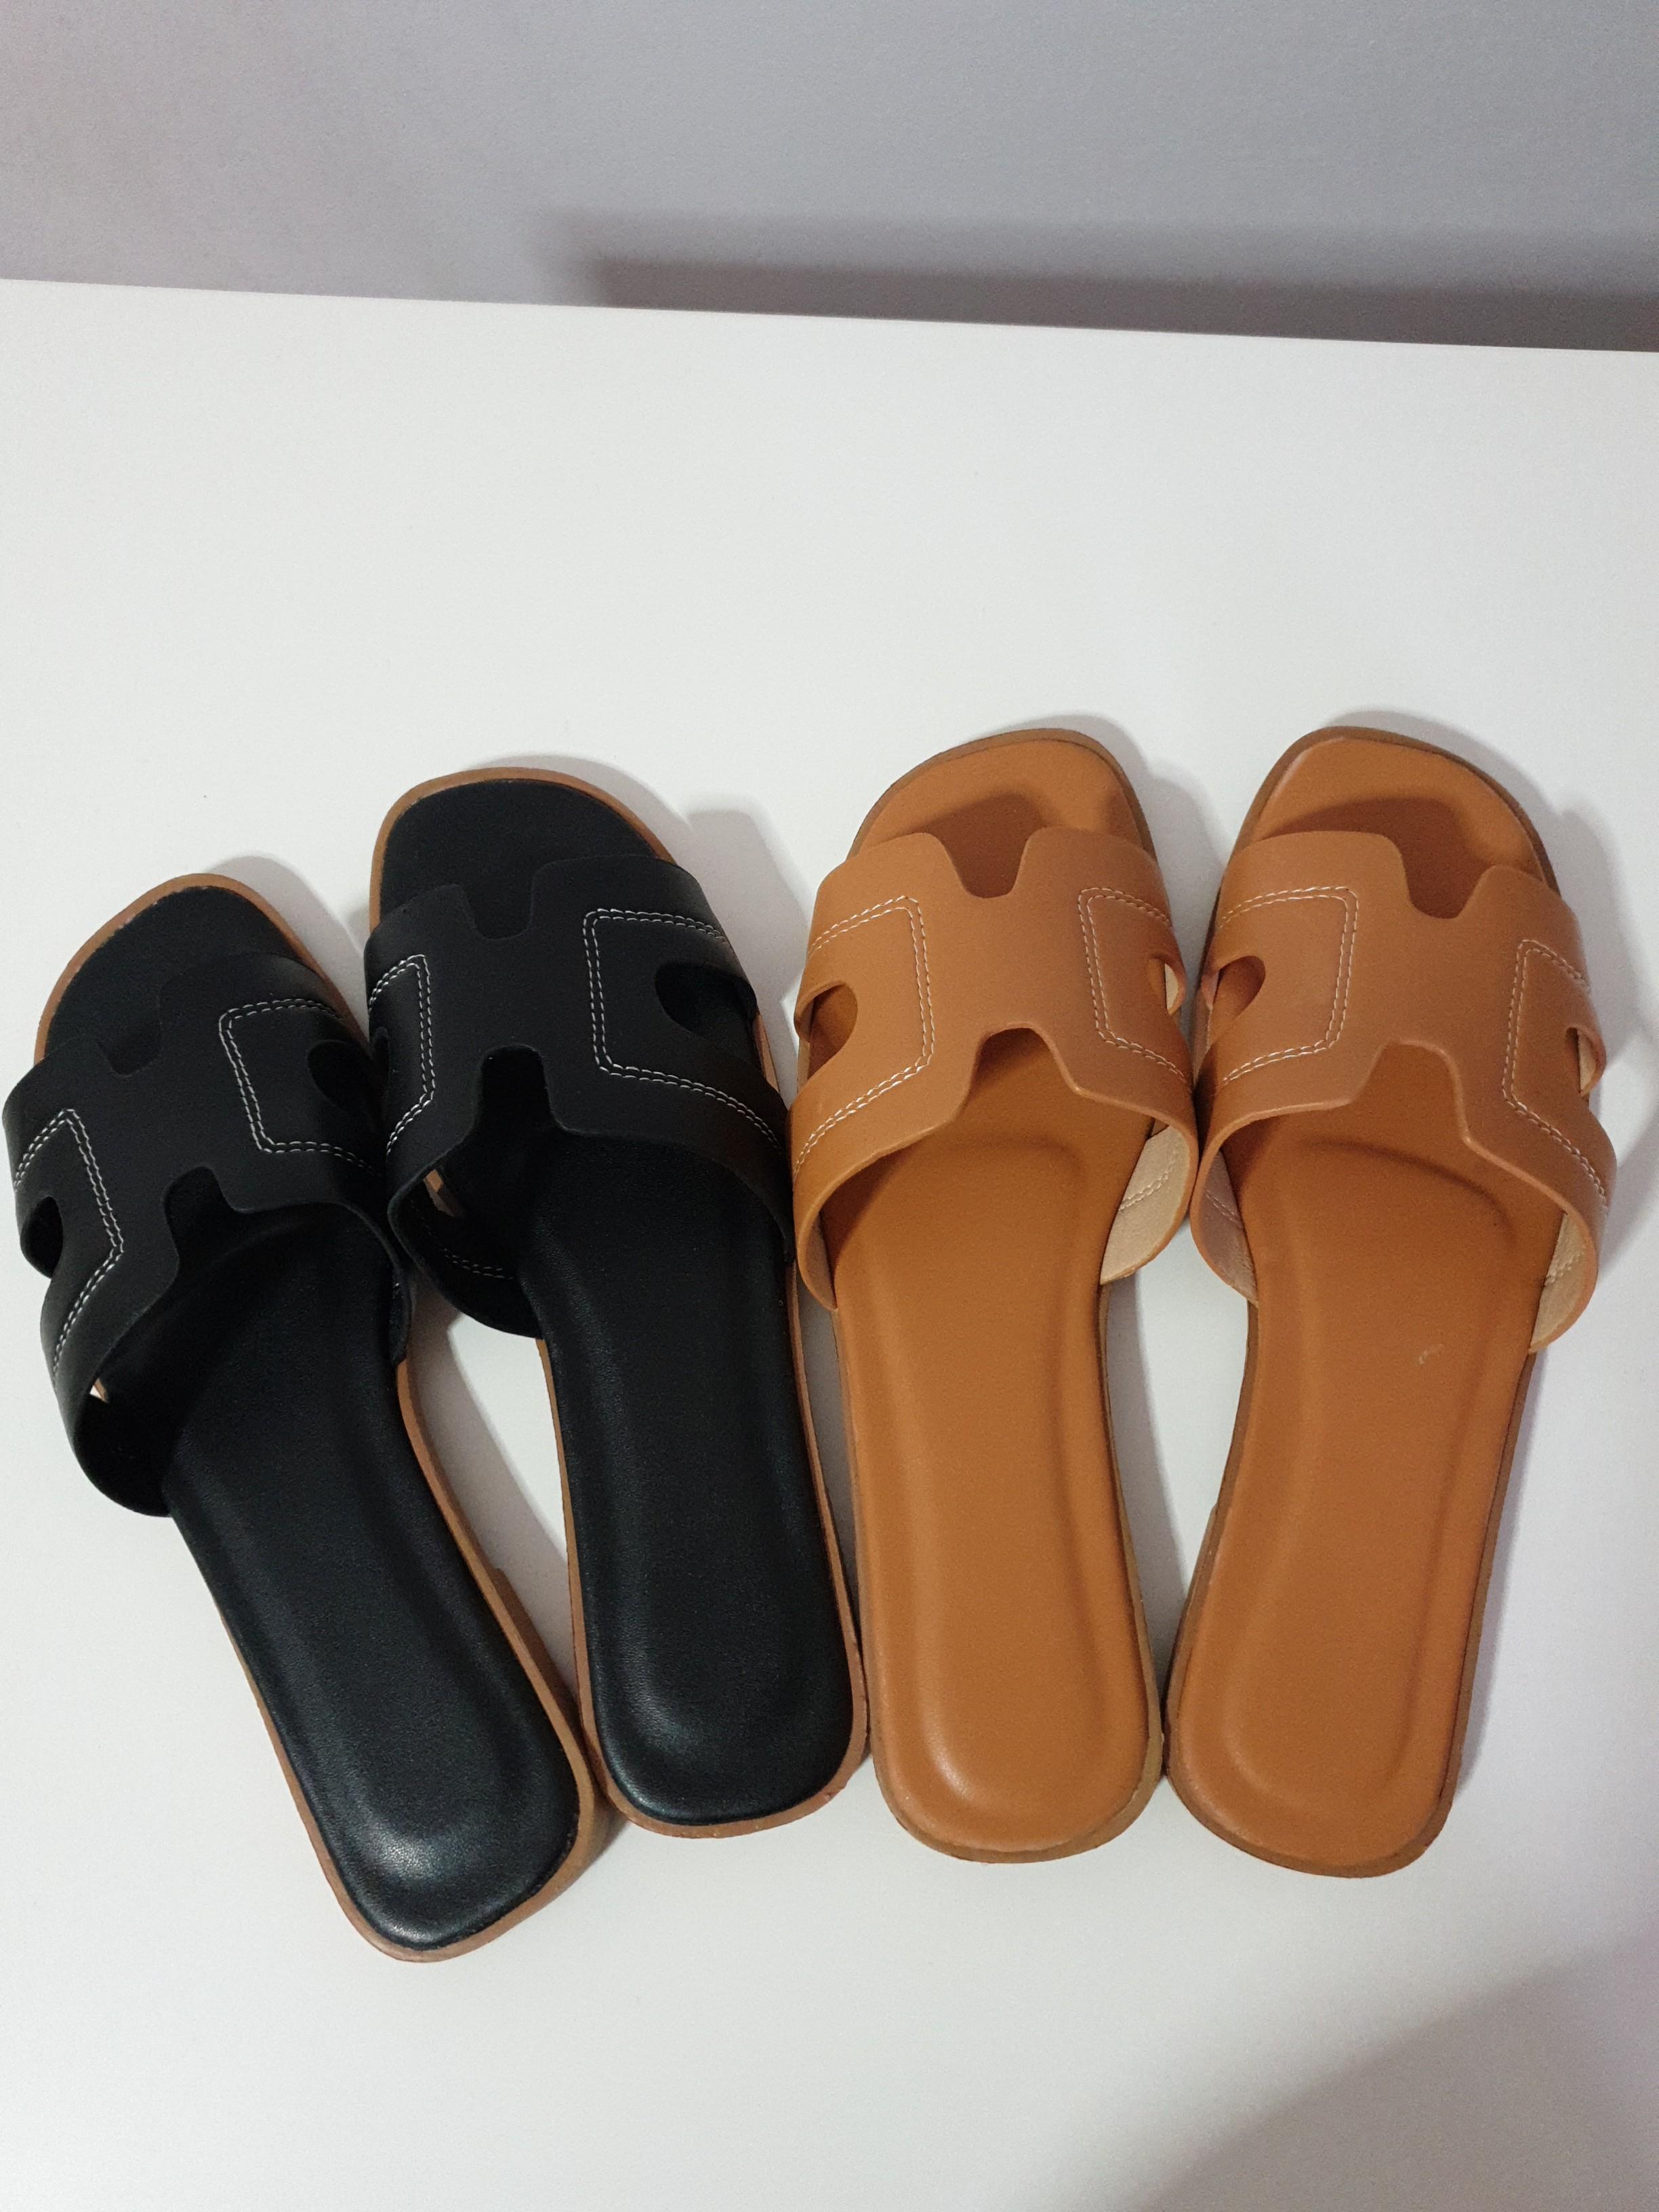 Size 38 Ladies sandals / Slippers 